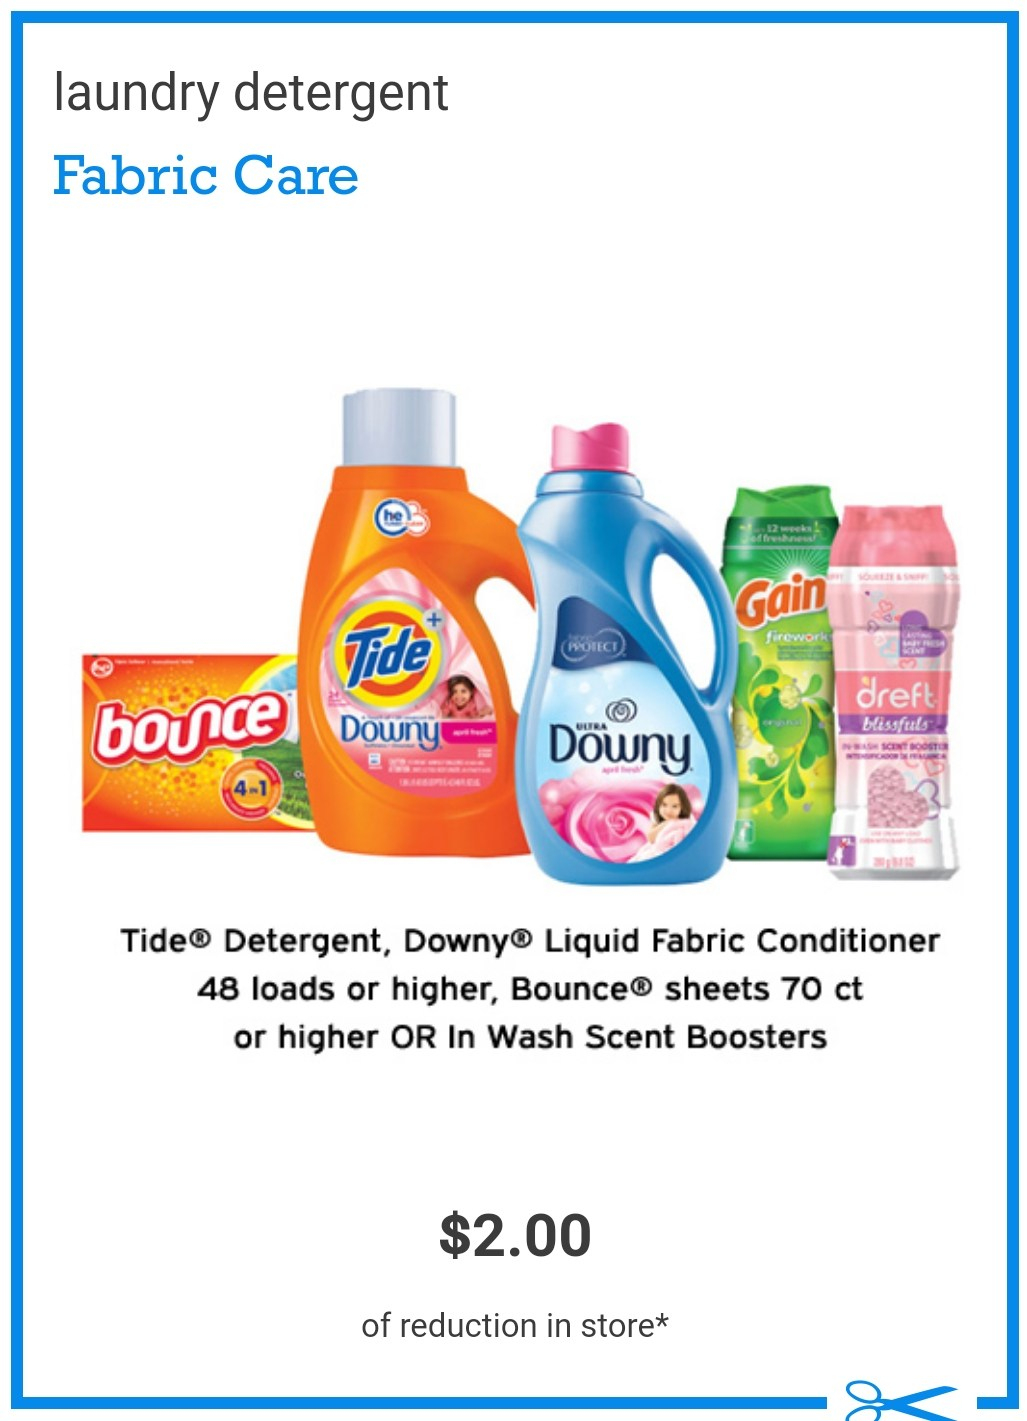 Gain Coupons Archives - Cfl Coupon Moms - Free Printable Gain Laundry Detergent Coupons